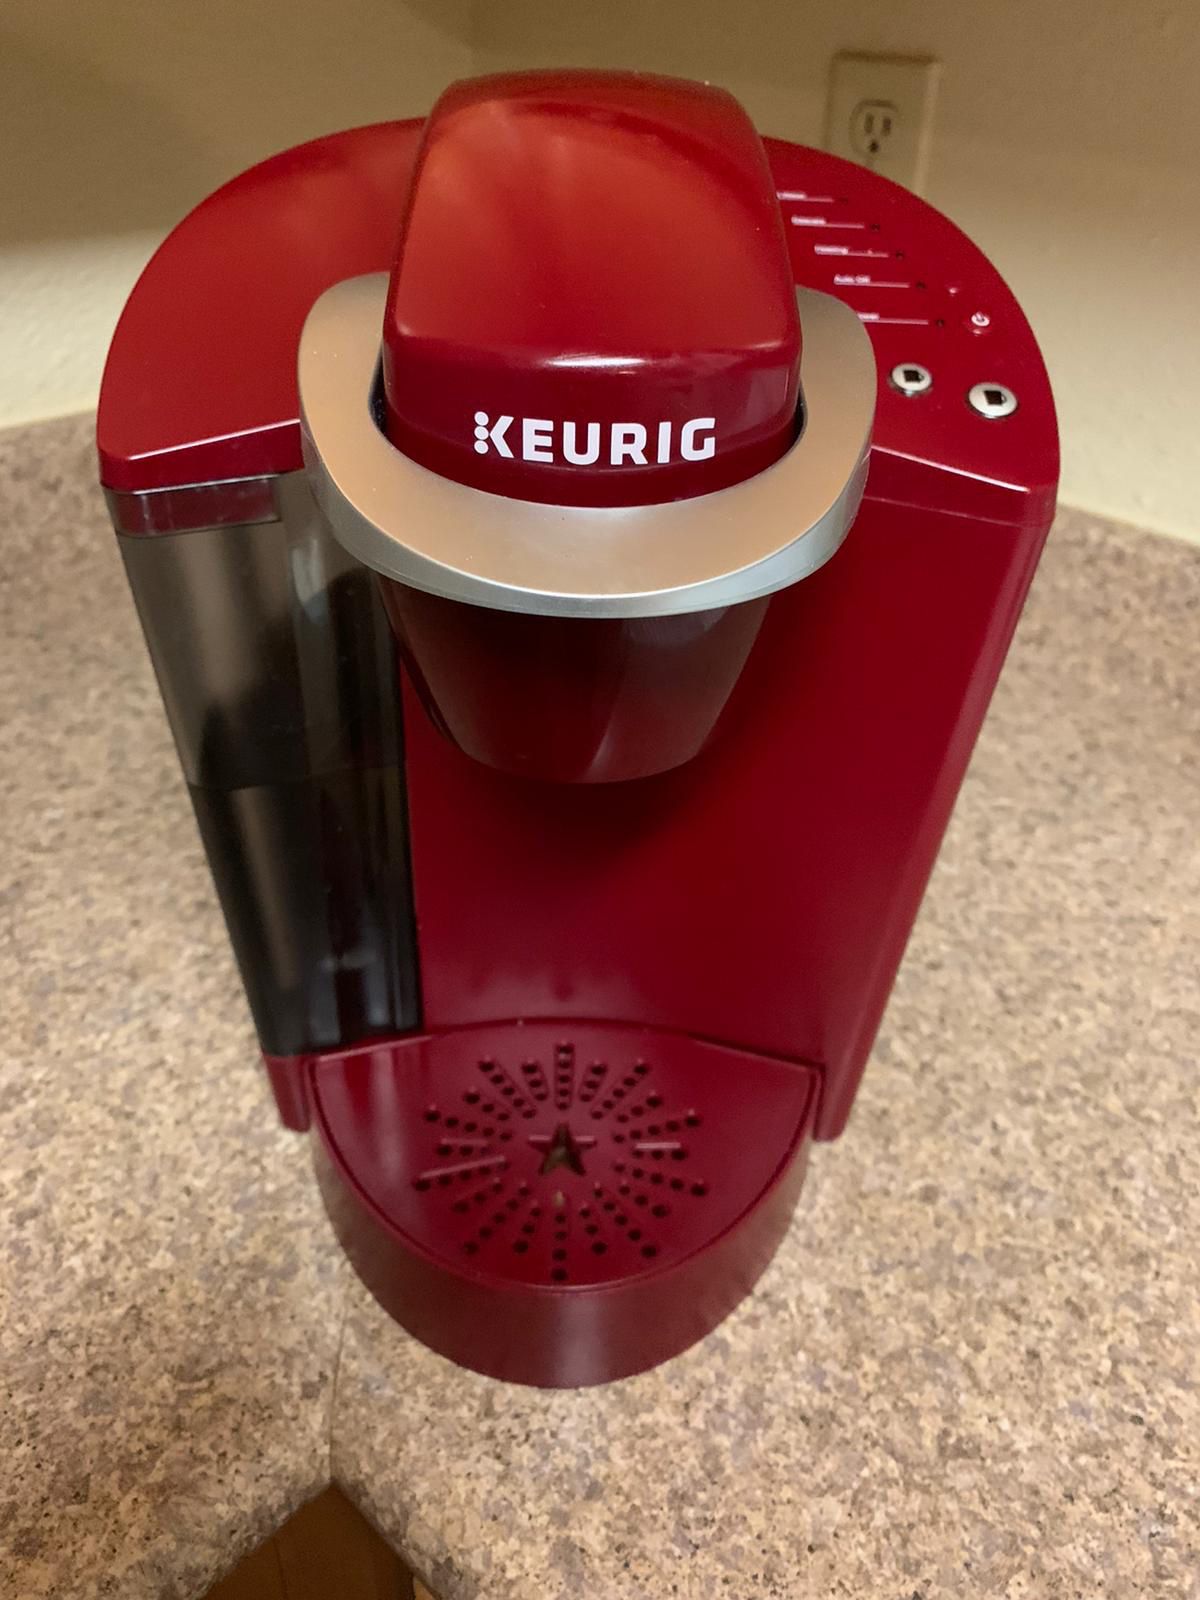 KEURIG coffee maker. Like New. It works perfect and it looks super cool. I’m selling it because I moved and somebody gave the same one una differen